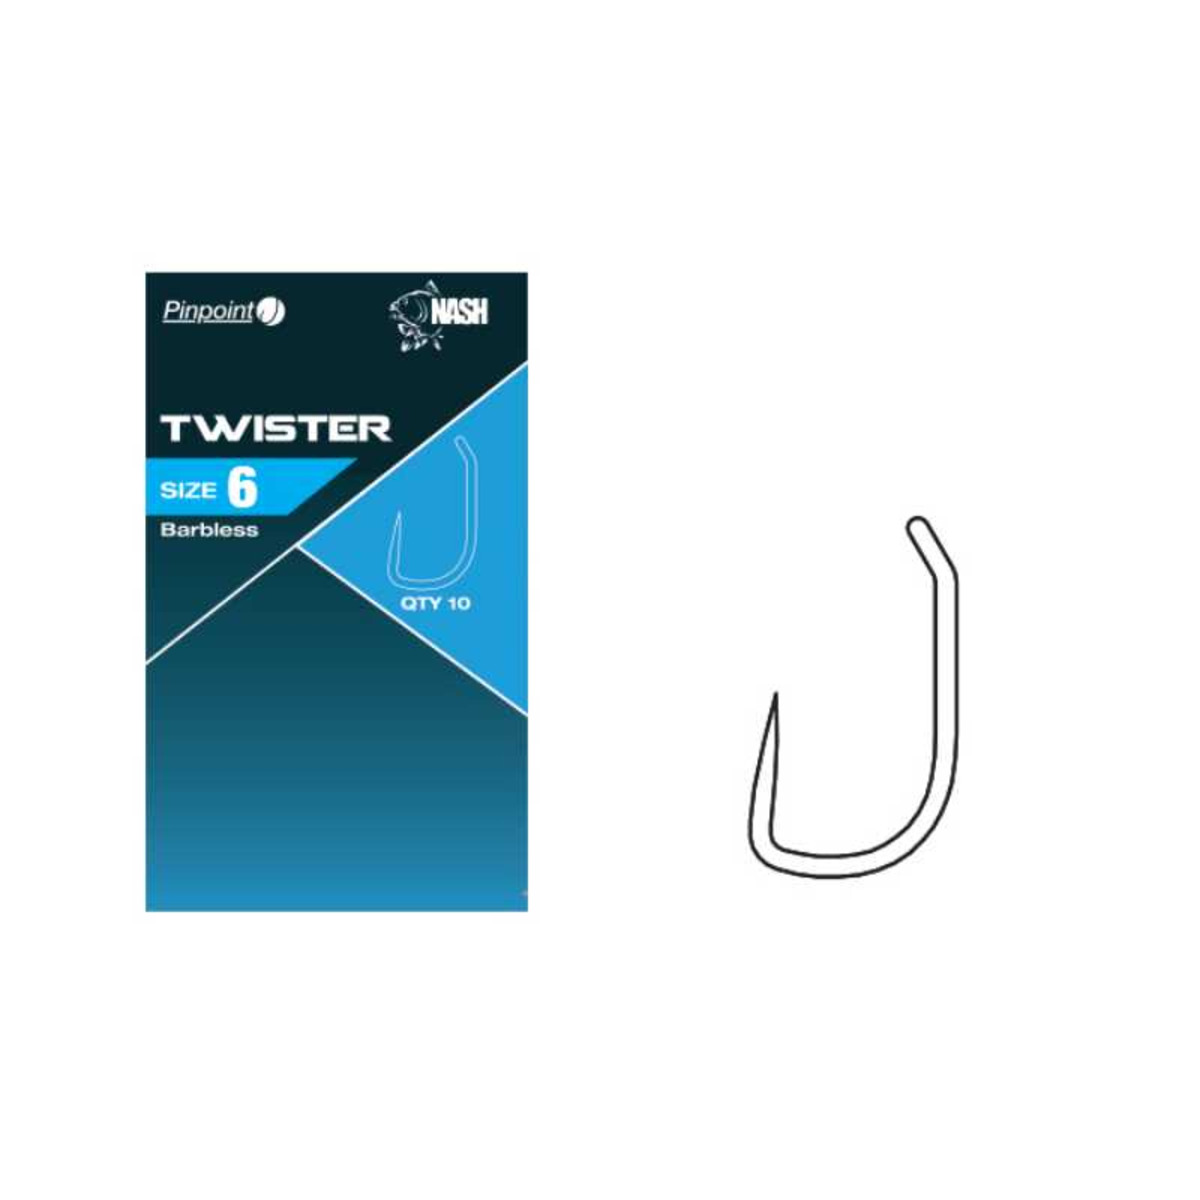 Nash Twister - Size 6  Barbless